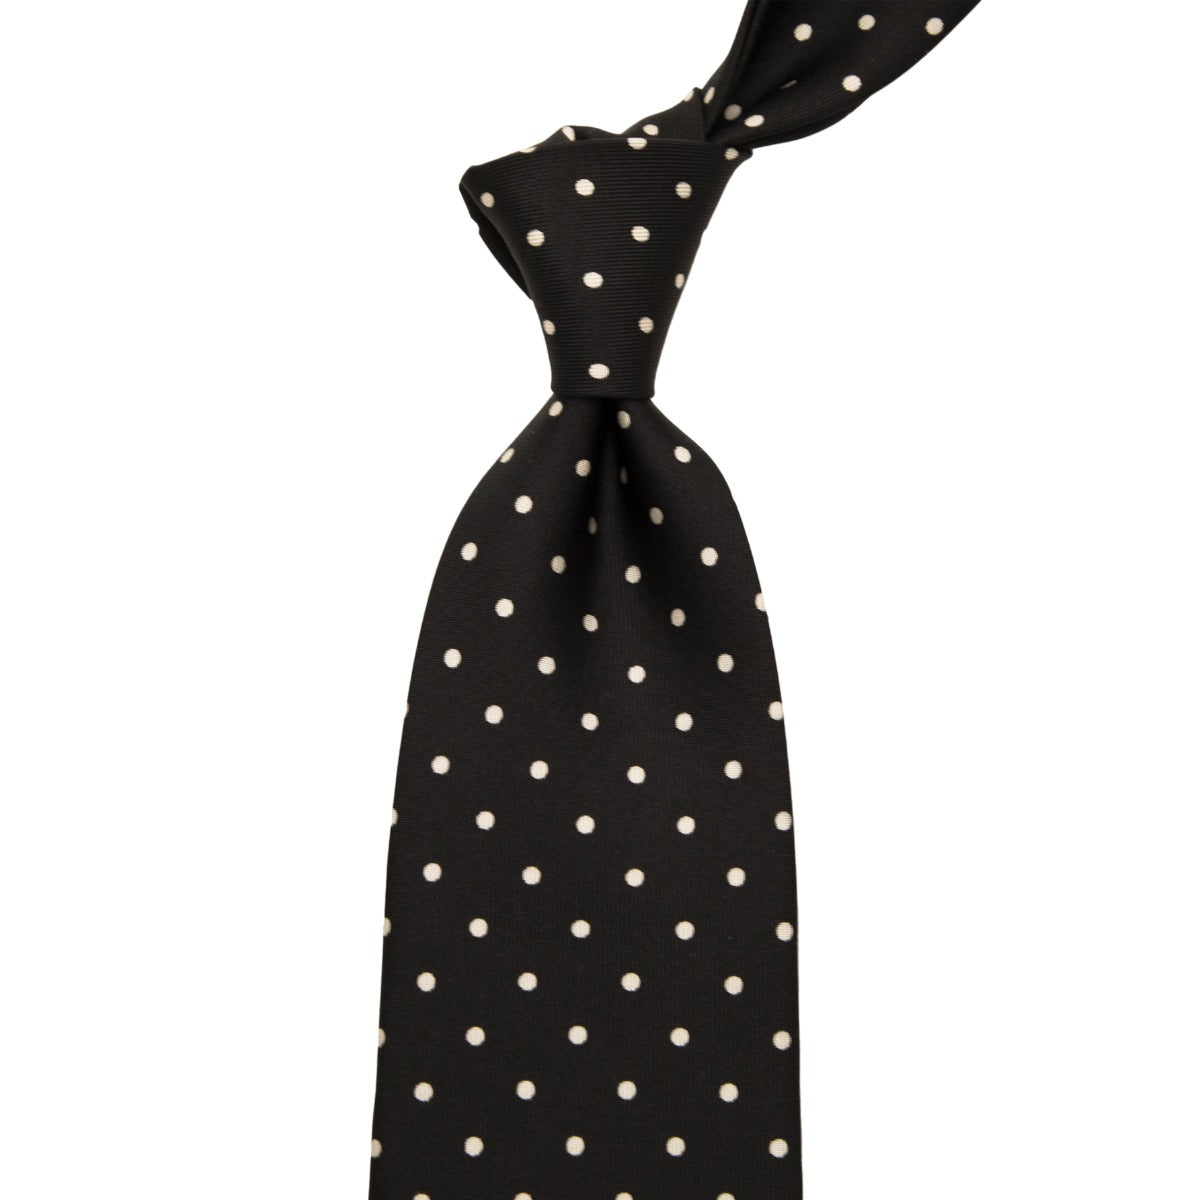 A Sovereign Grade Black/White 36oz London Dot Tie from KirbyAllison.com in the United Kingdom.